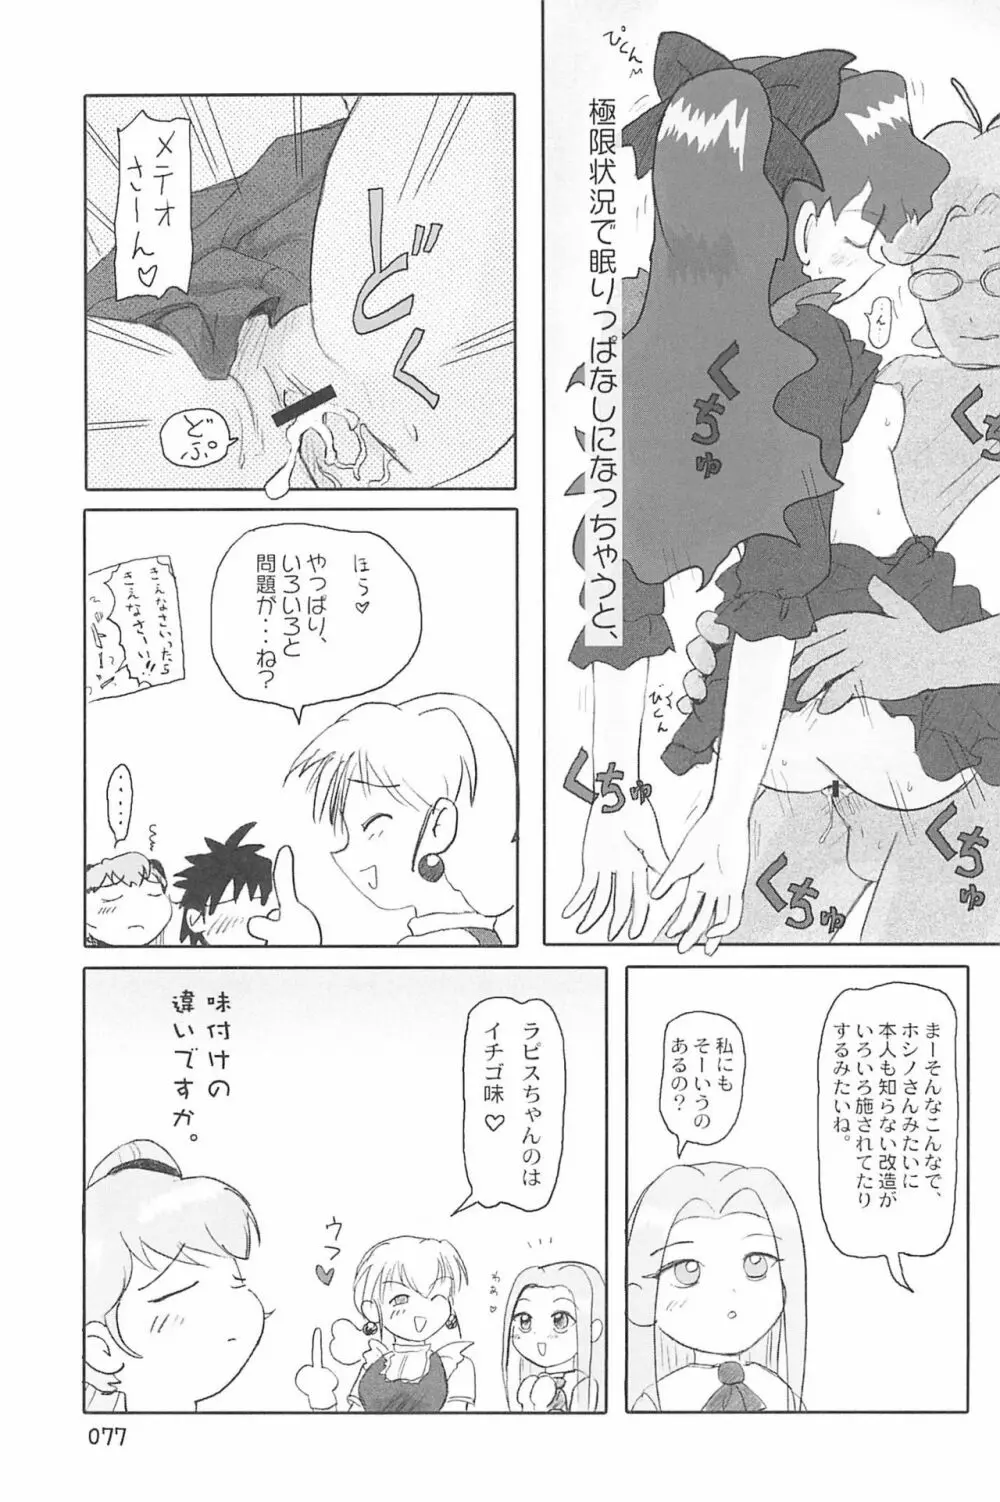 ND-special Volume 4 Page.77